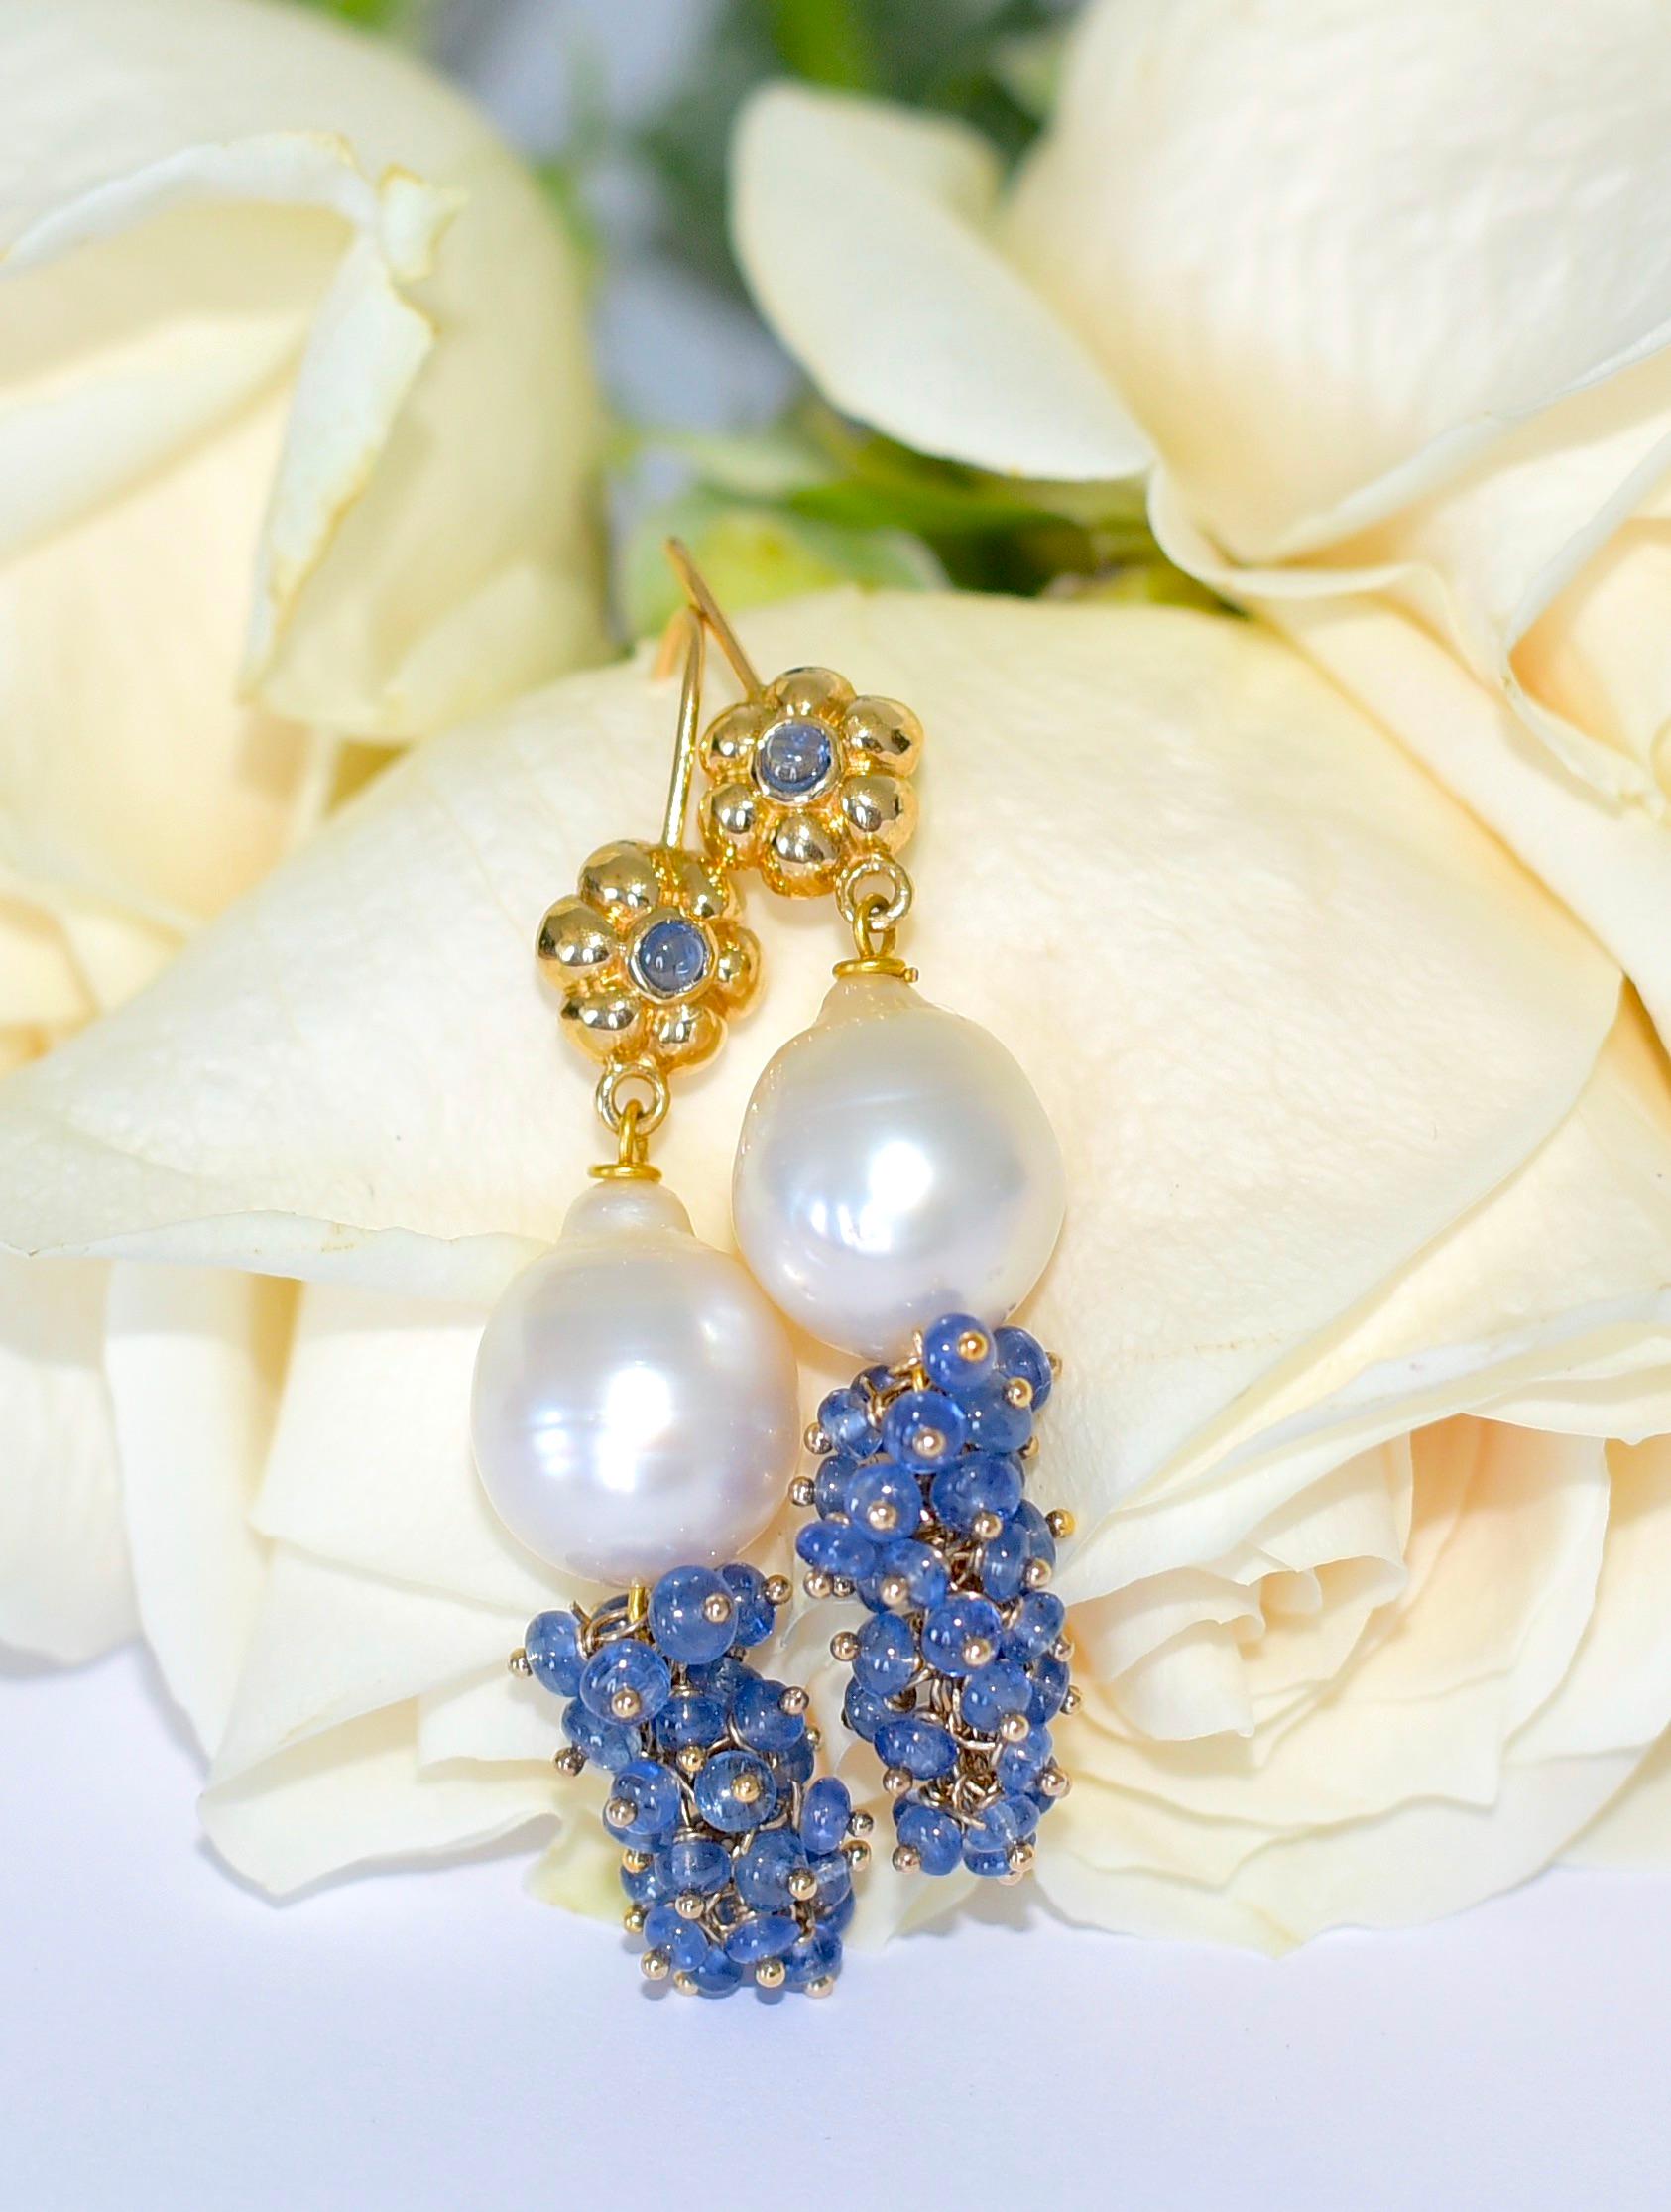 Bead White South Sea Pearl, Blue Sapphire Earrings in 18K Solid Yellow Gold